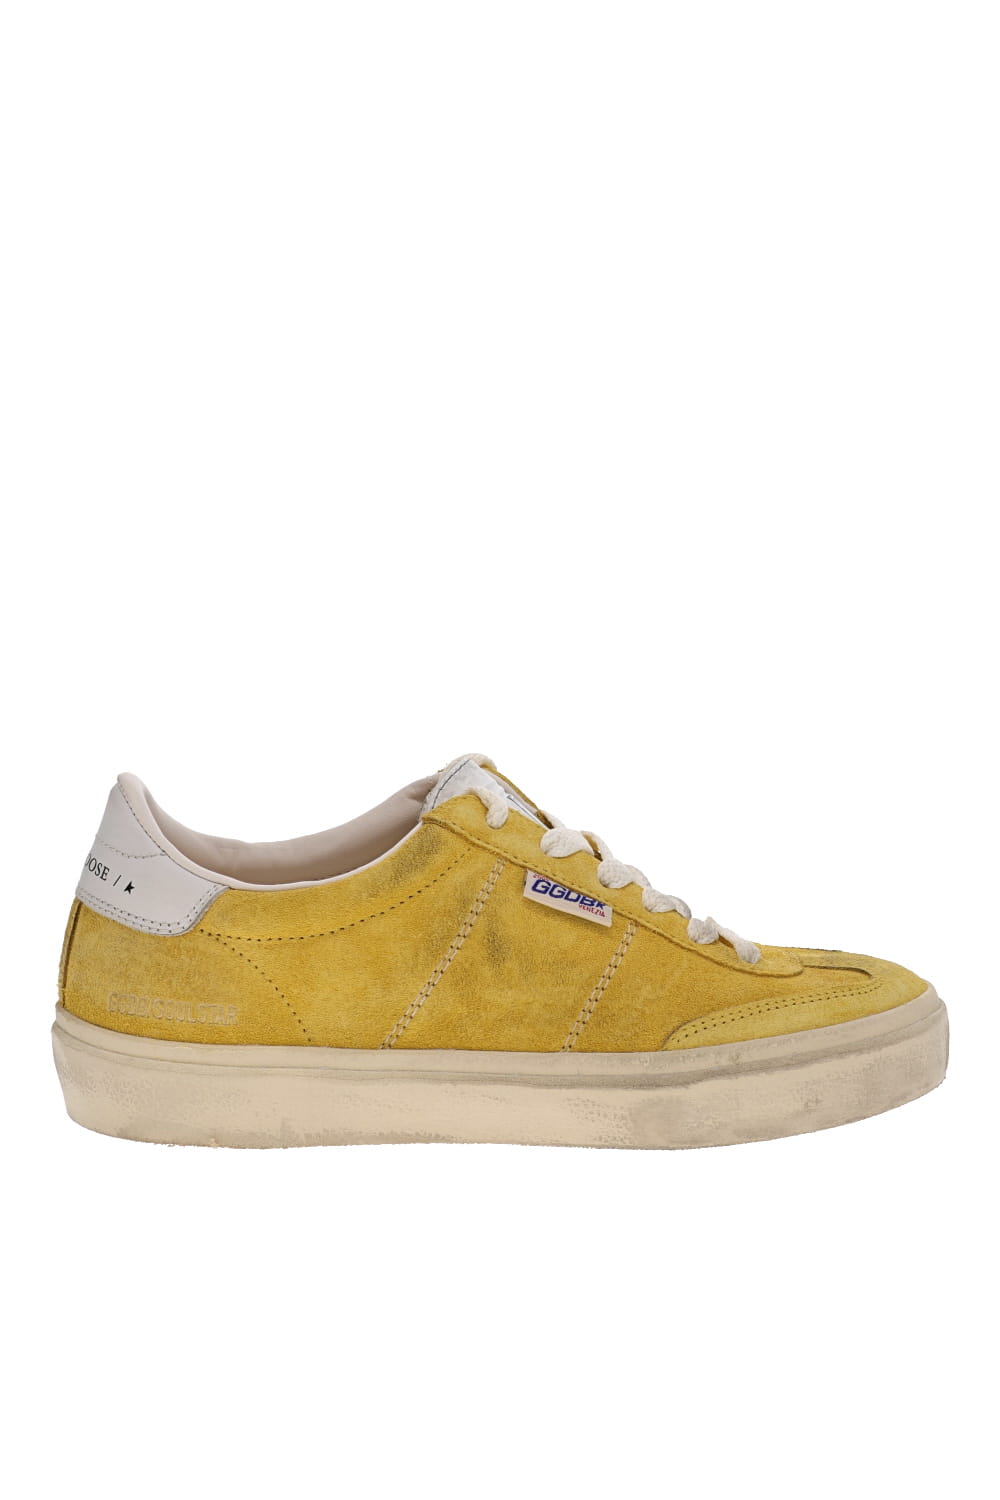 Soul Star Honey Suede Leather Sneakers